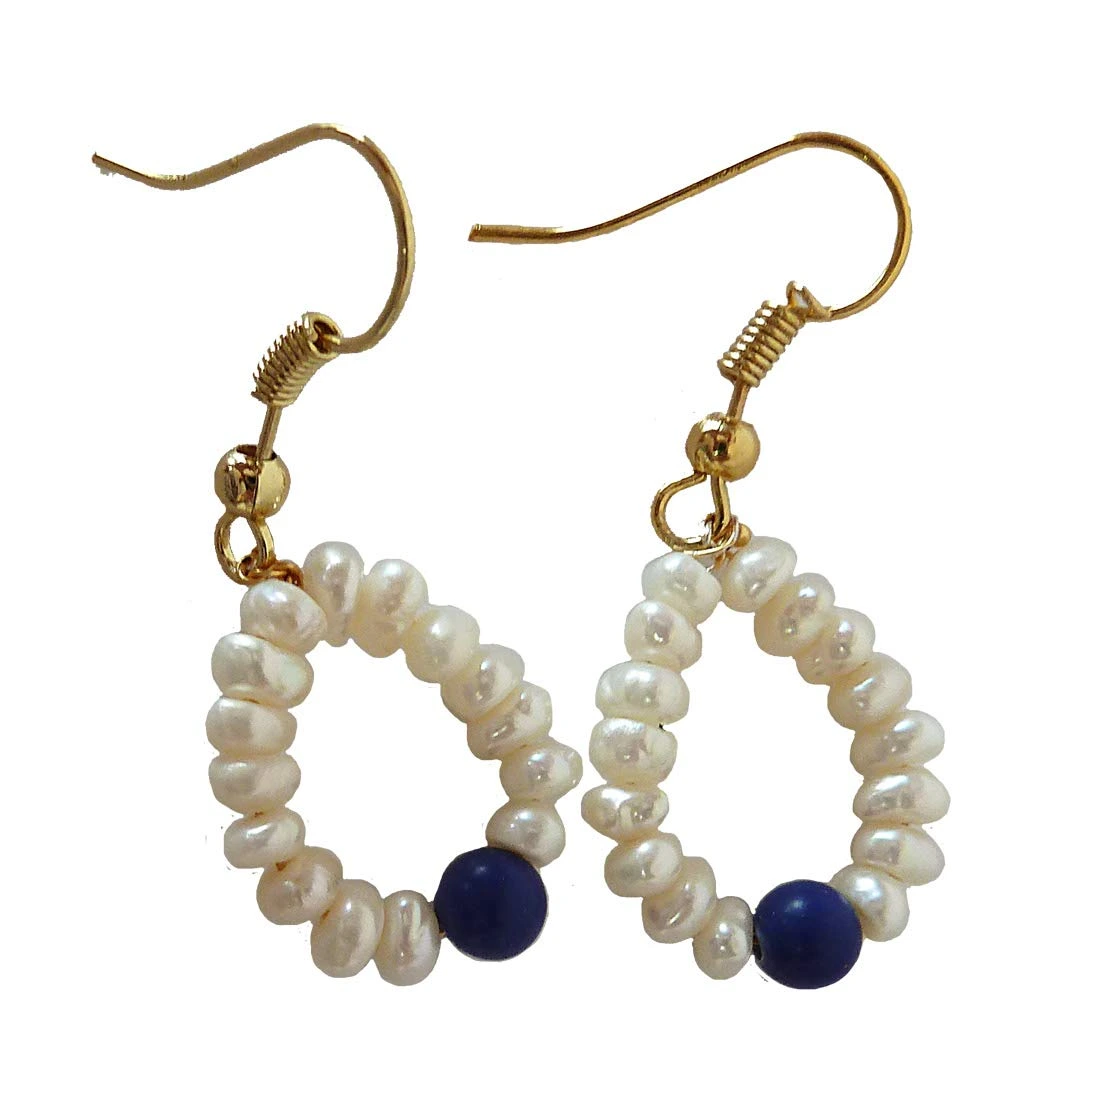 Dangling Circular Blue Lapiz Beads, Freshwater Pearl and Gold Plated Wire Style Earrings(SE382)